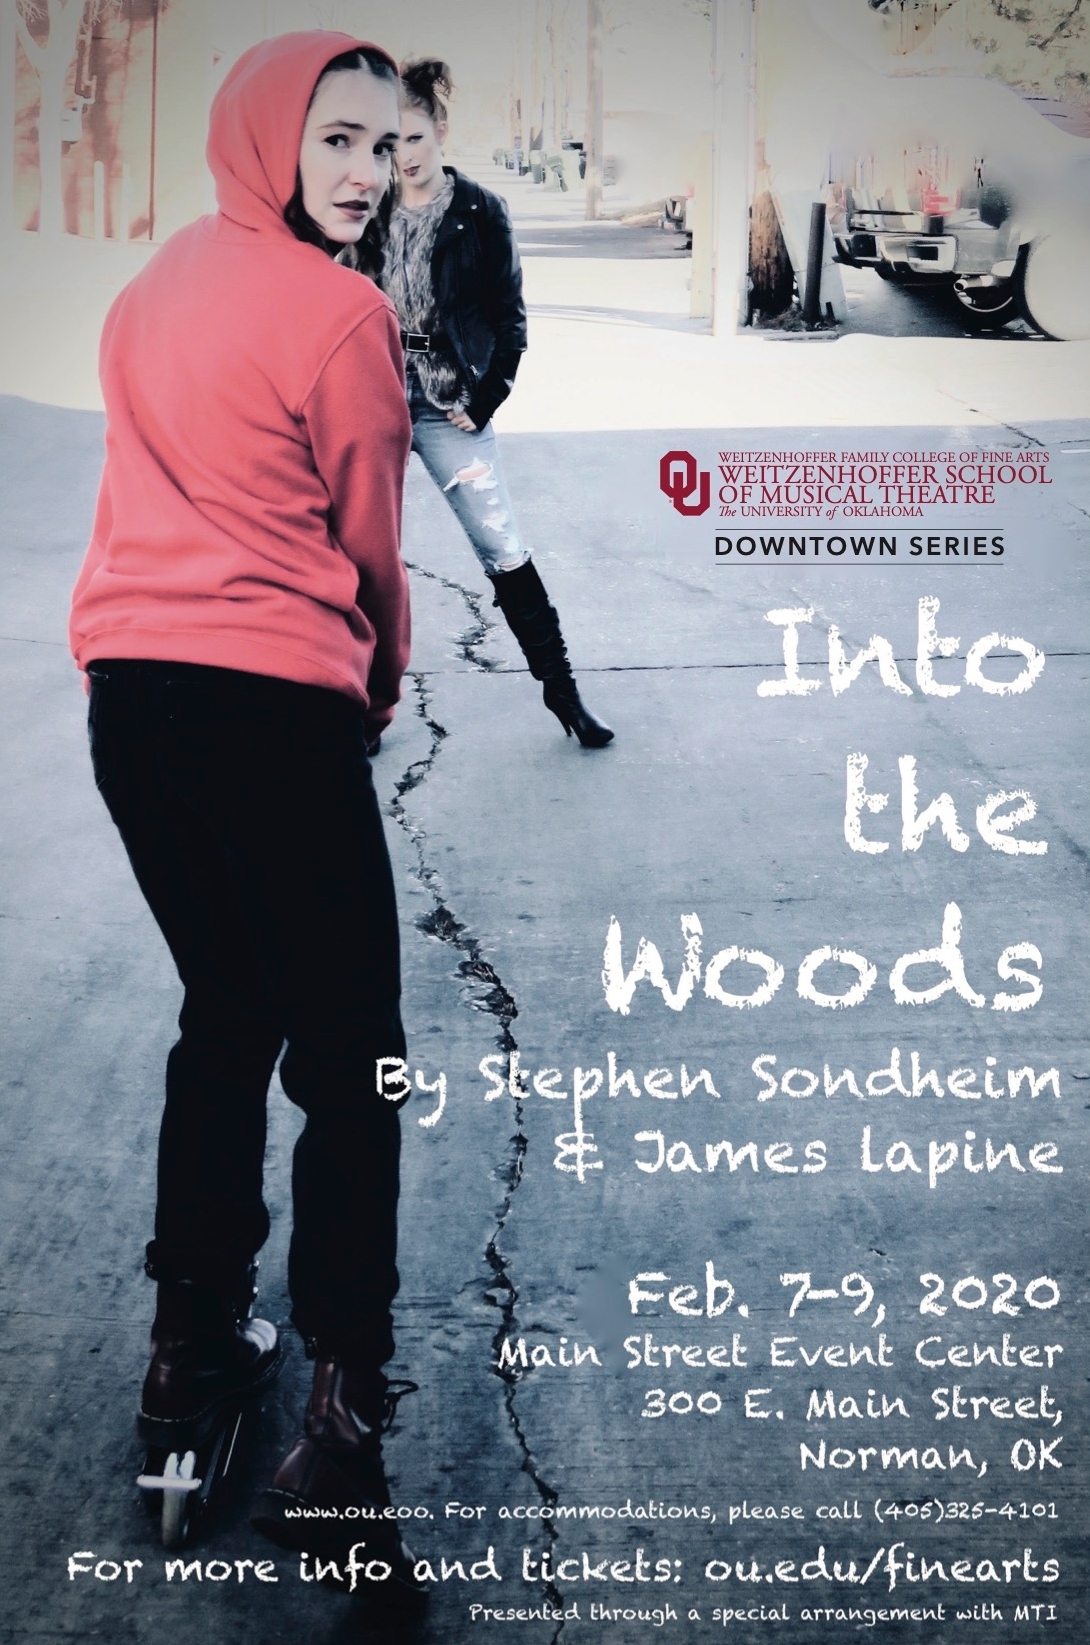 OU Weitzenhoffer Family College of Fine Arts, Weitzenhoffer School of Musical Theatre, The University of Oklahoma. Downtown Series. Into the Woods, by Stephen Sondheim & James Lapine. Feb. 7-9, 2020. Main Street Event Center, 300 E. Main Street, Norman, OK. www.ou.eoo. For accommodations, please call (405) 325-4101. For more info and tickets: ou.edu/finearts. Presented through a special arrangement with MTI.